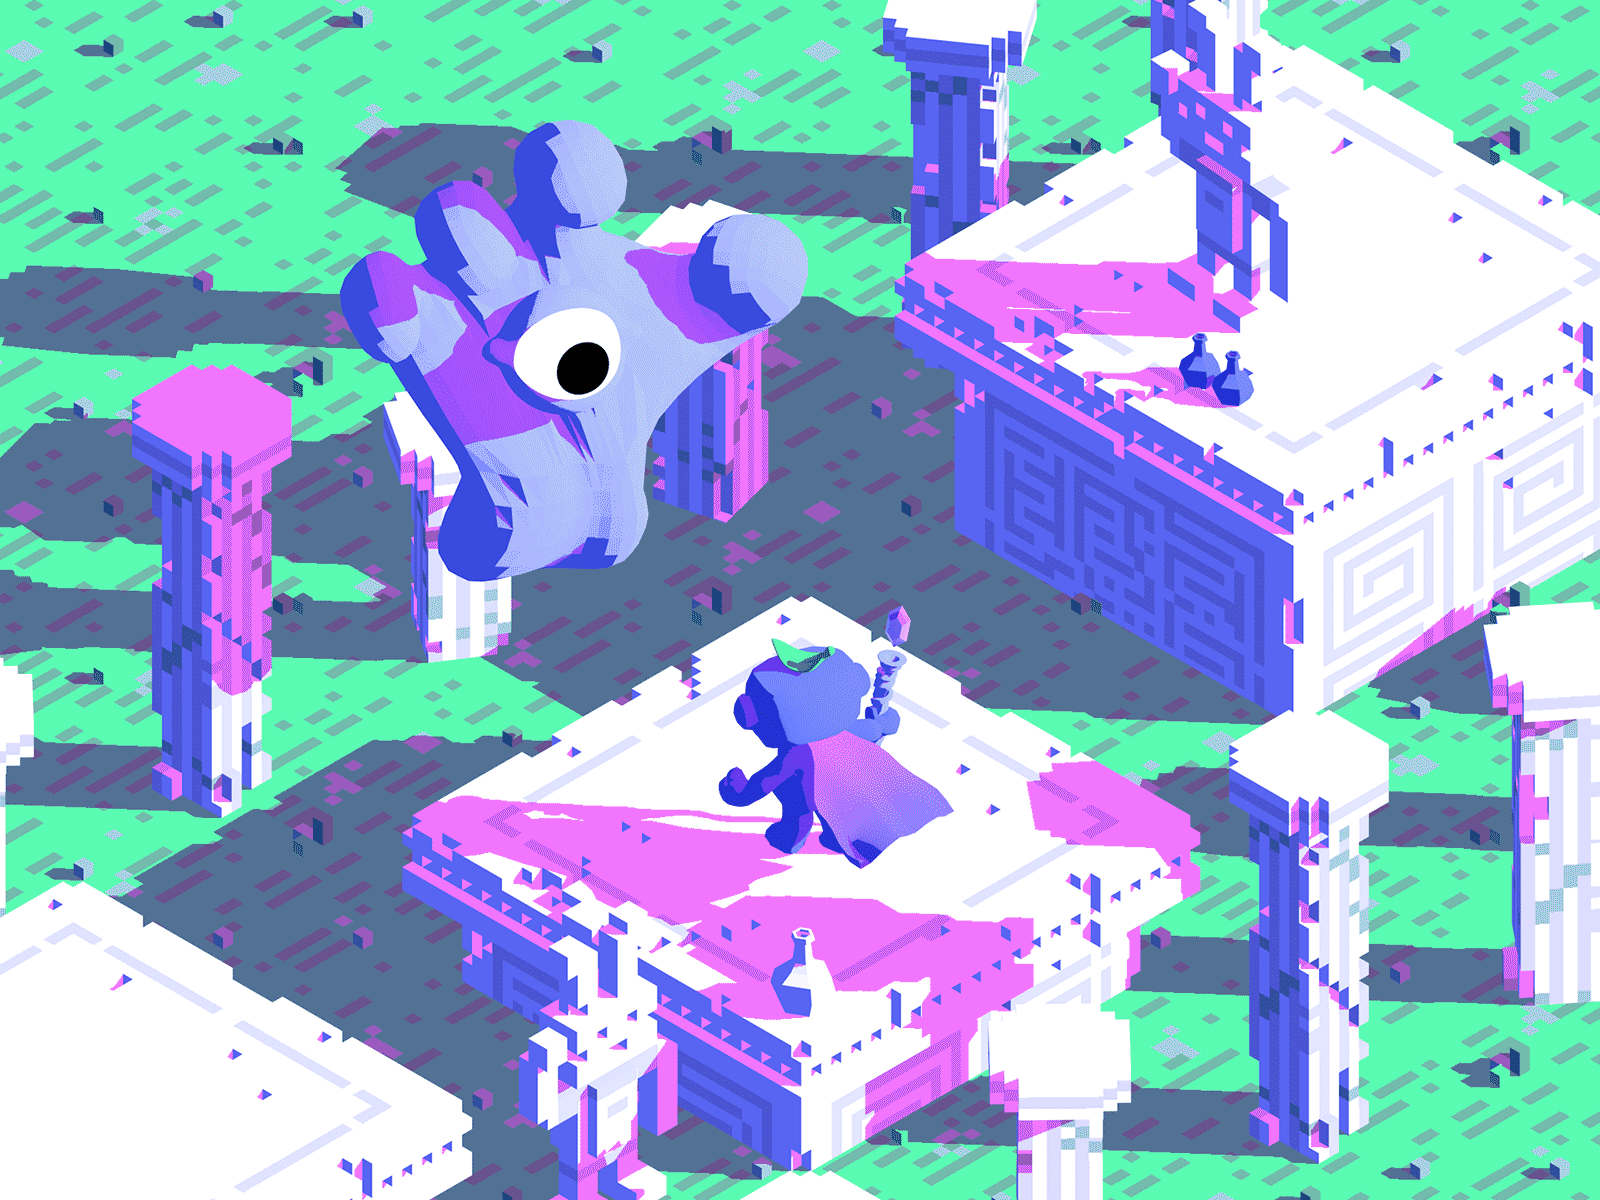 Discord’s wumpus fighting a hand shaped boss